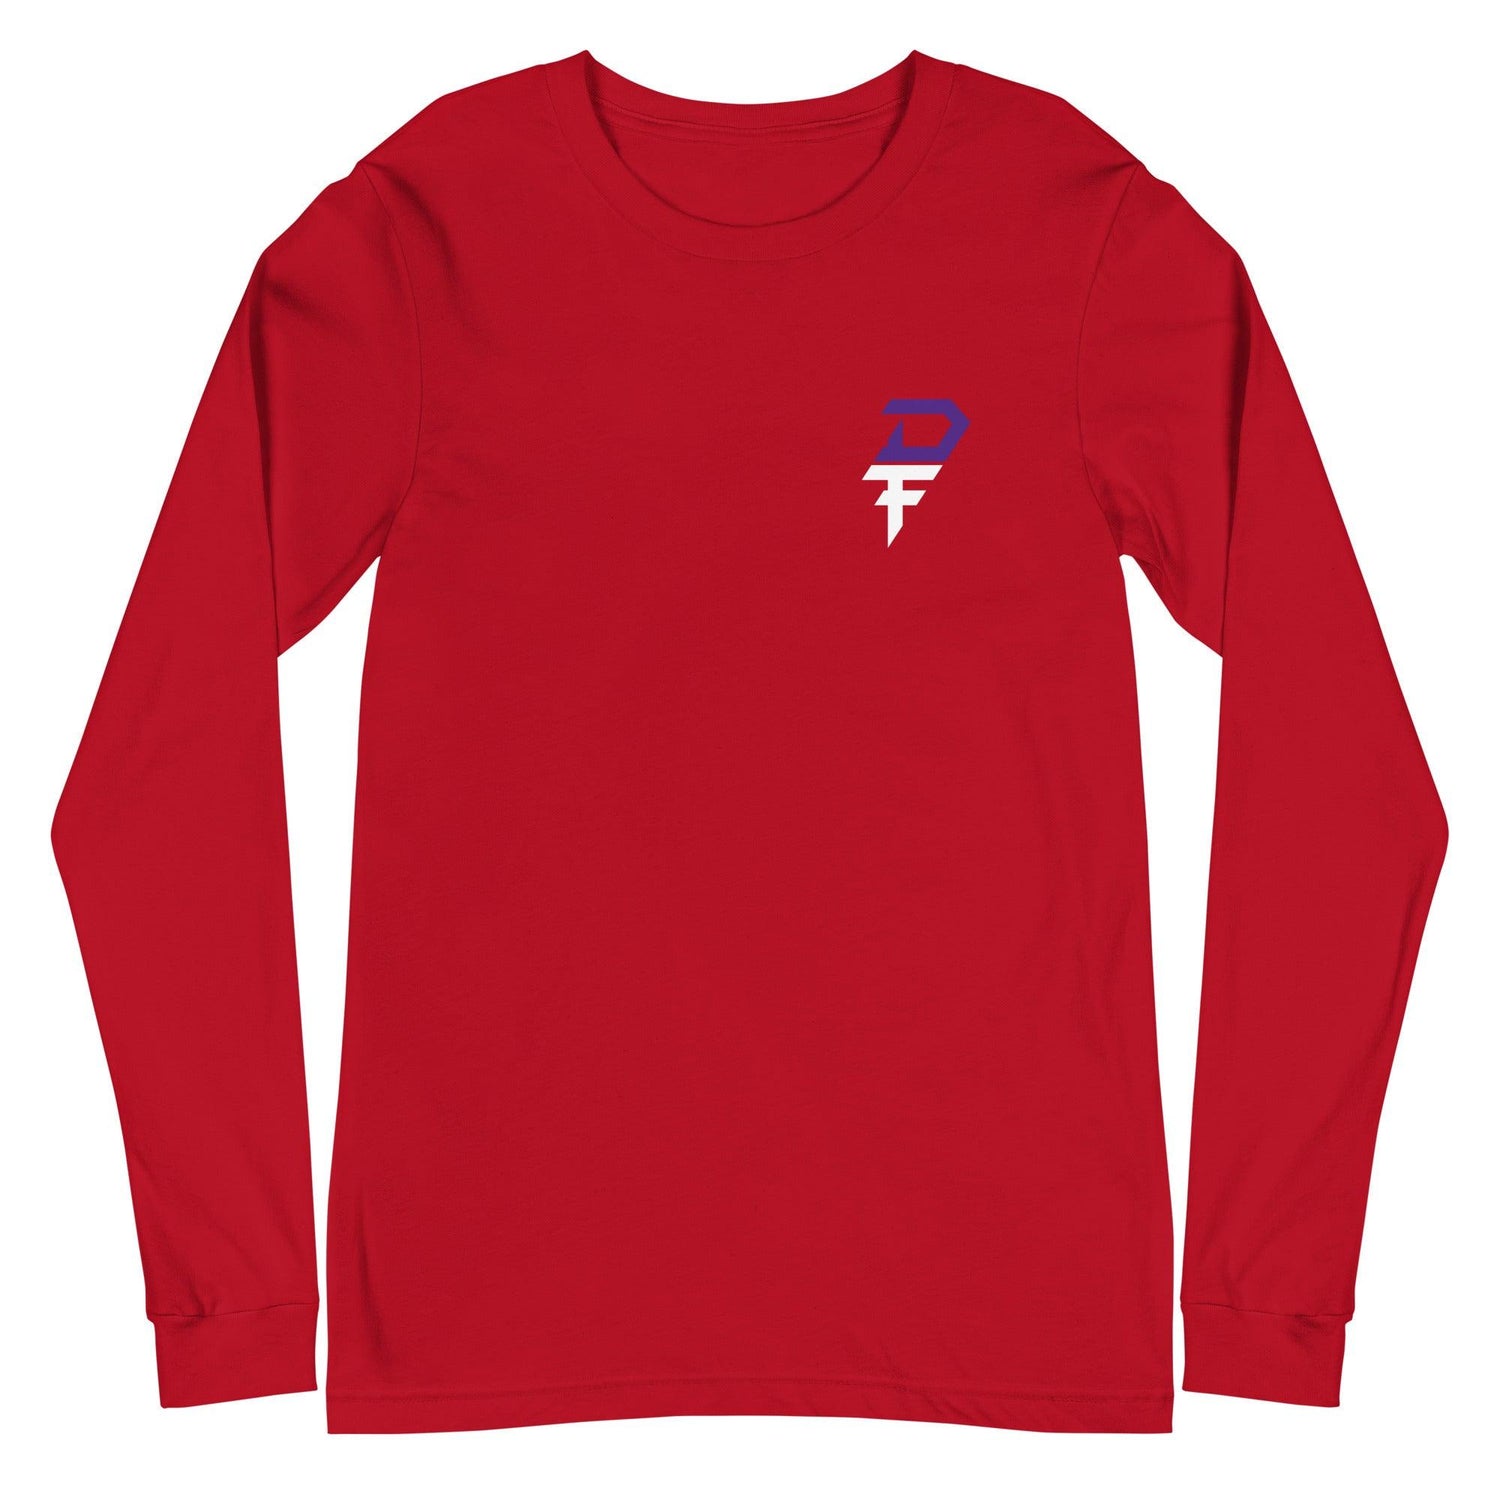 Dorian Finister "Essential" Long Sleeve Tee - Fan Arch